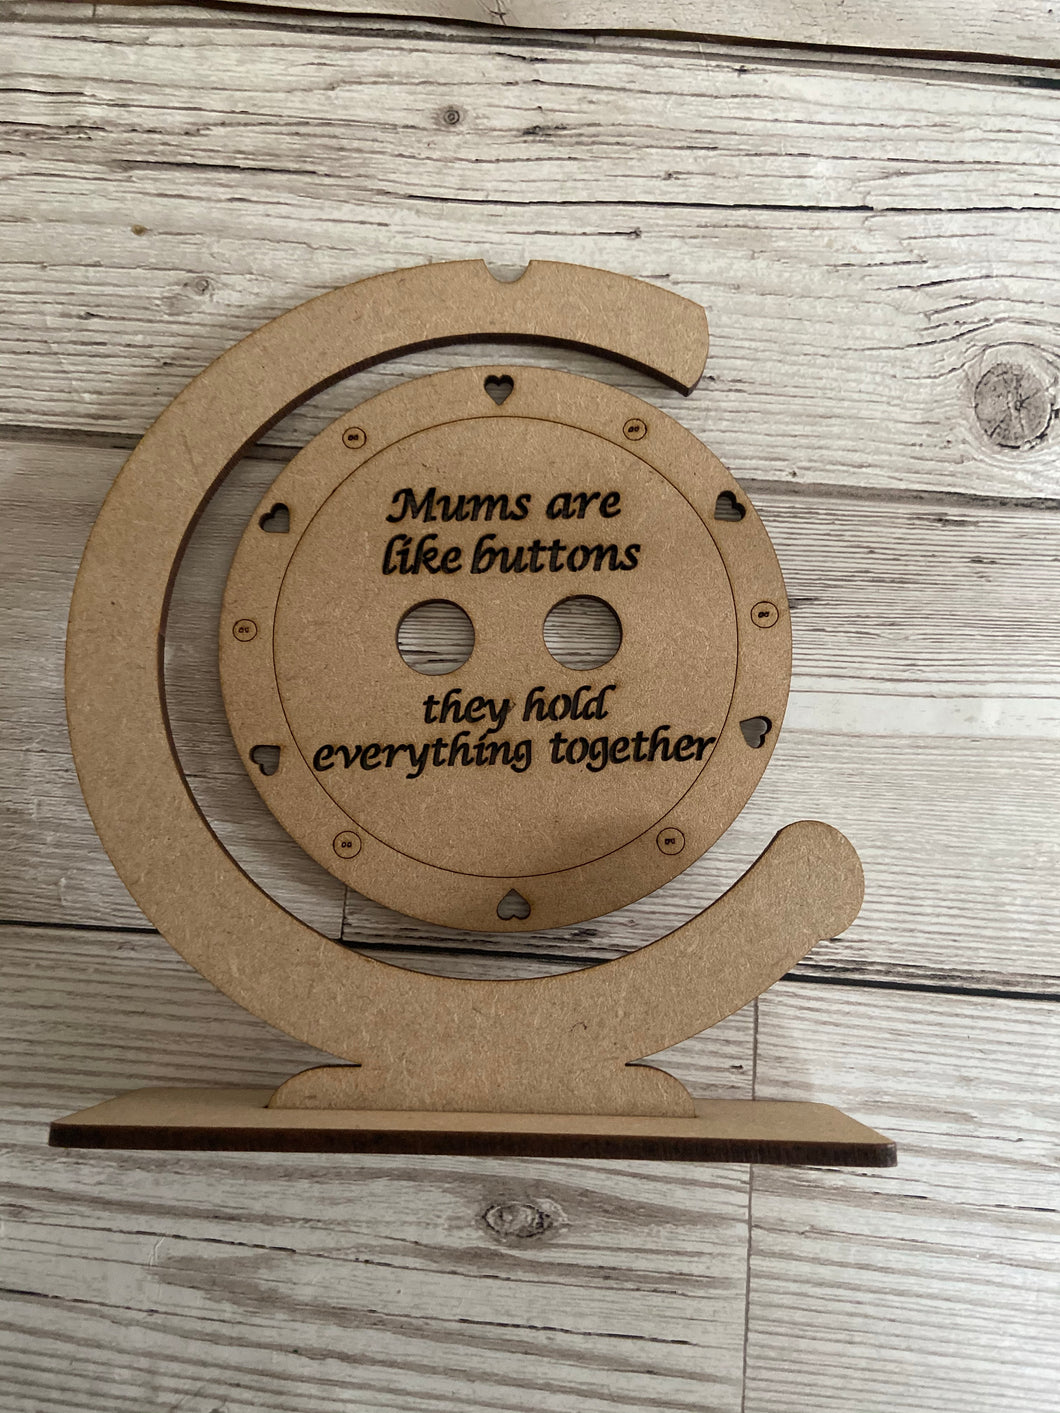 Wooden button with stand “mums are like buttons ..” - Laser LLama Designs Ltd